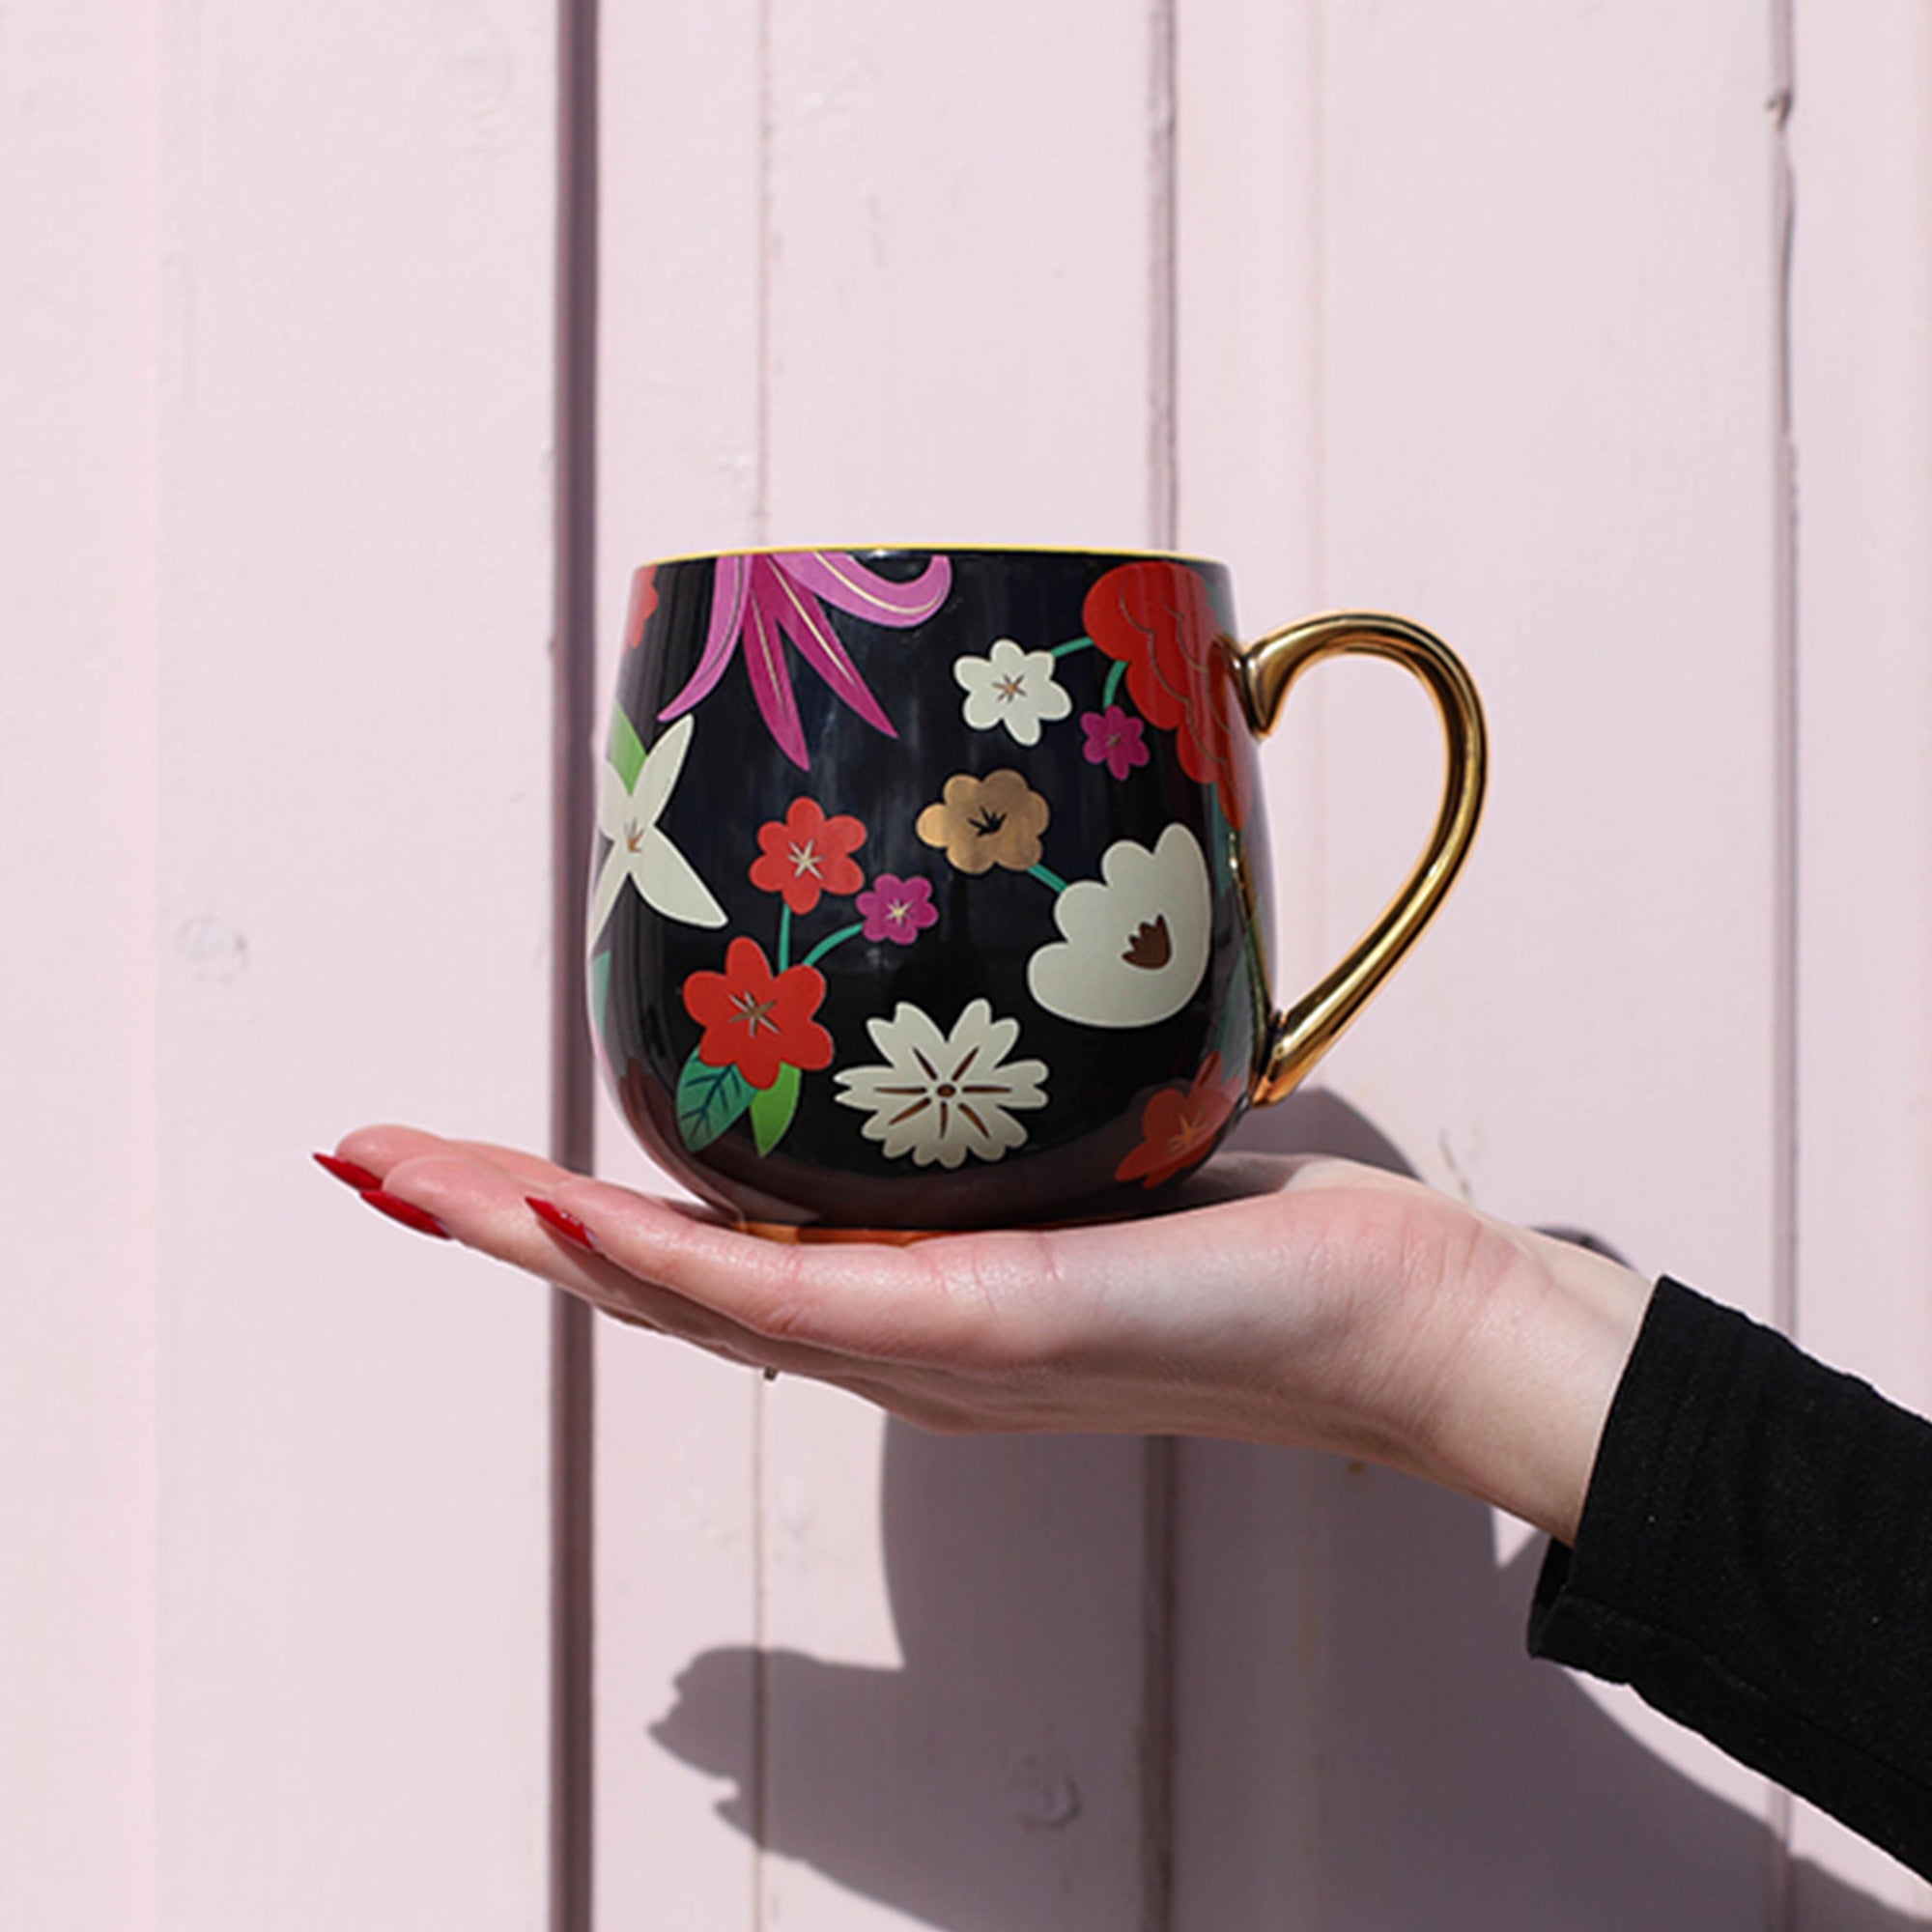 Luxury Gold-Handled Mug with Floral Print